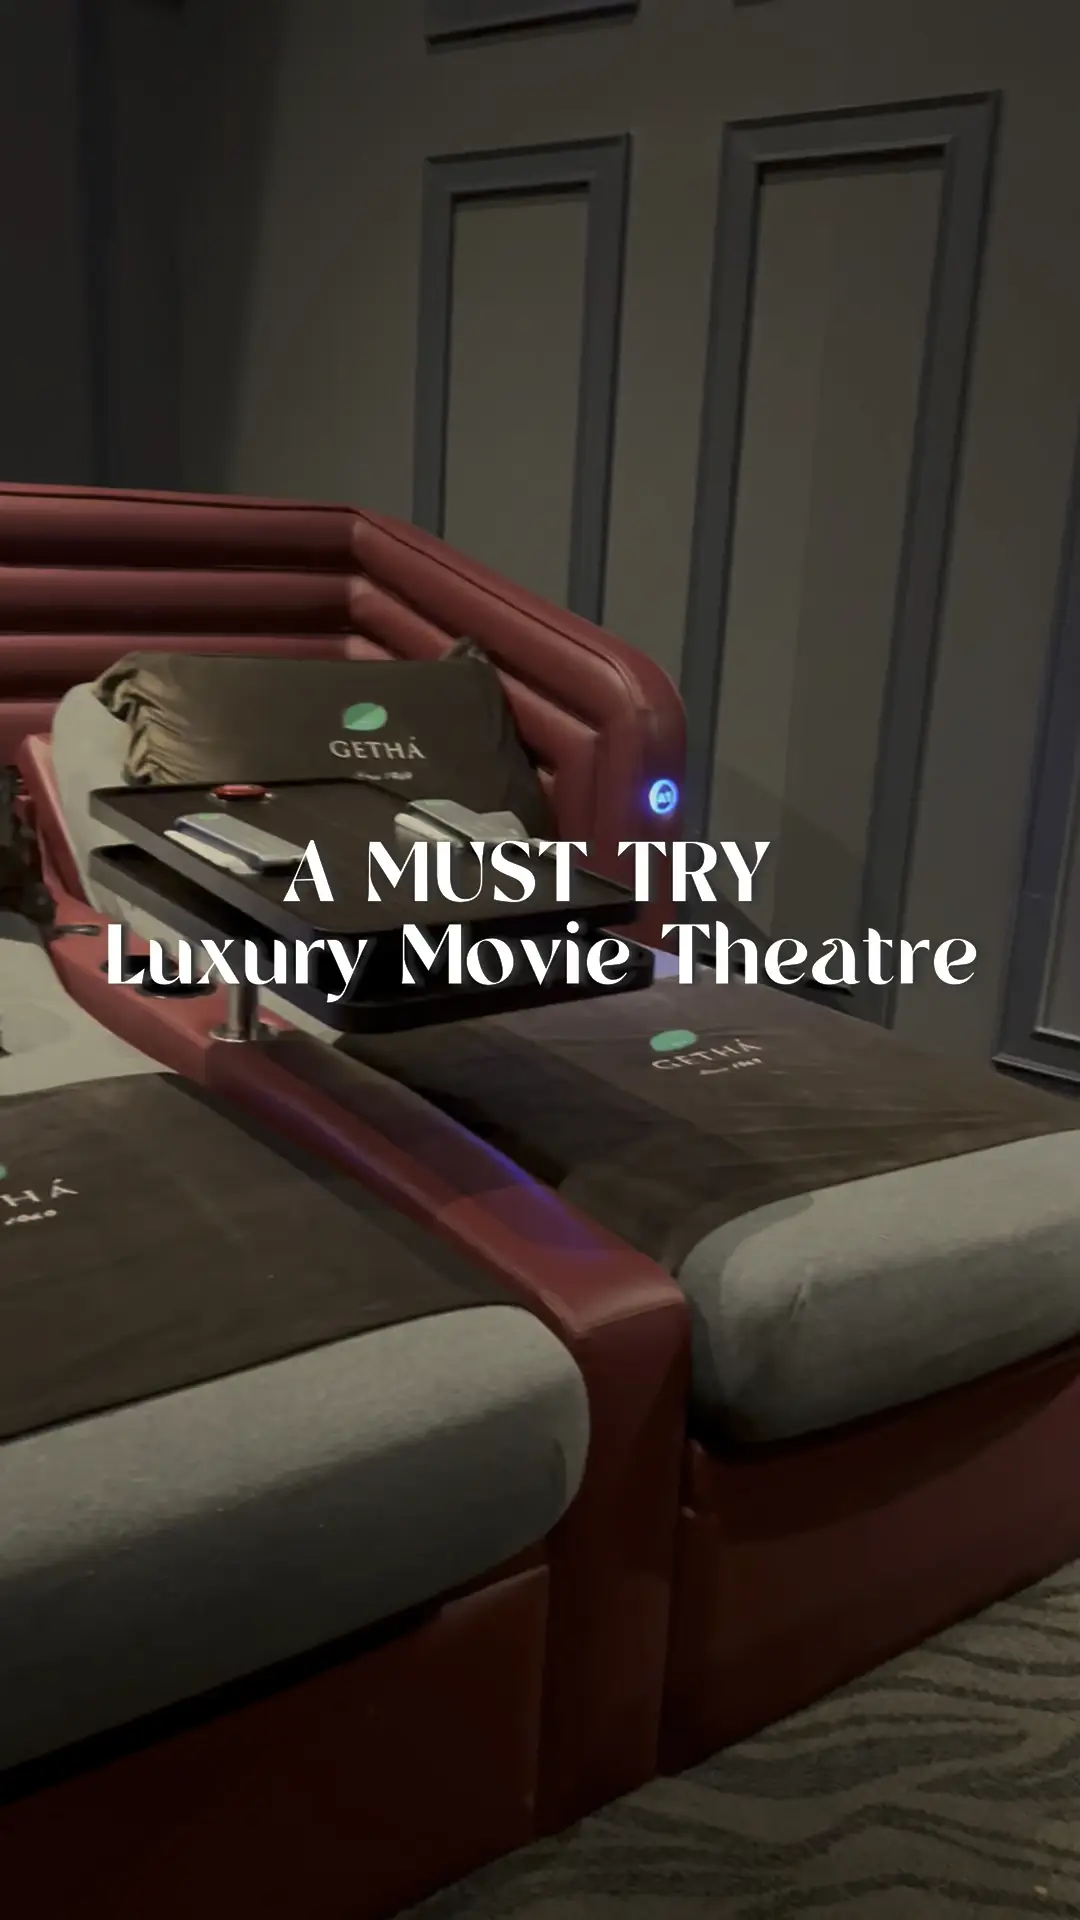 A MUST TRY luxury movie theatre in JB?! 's images